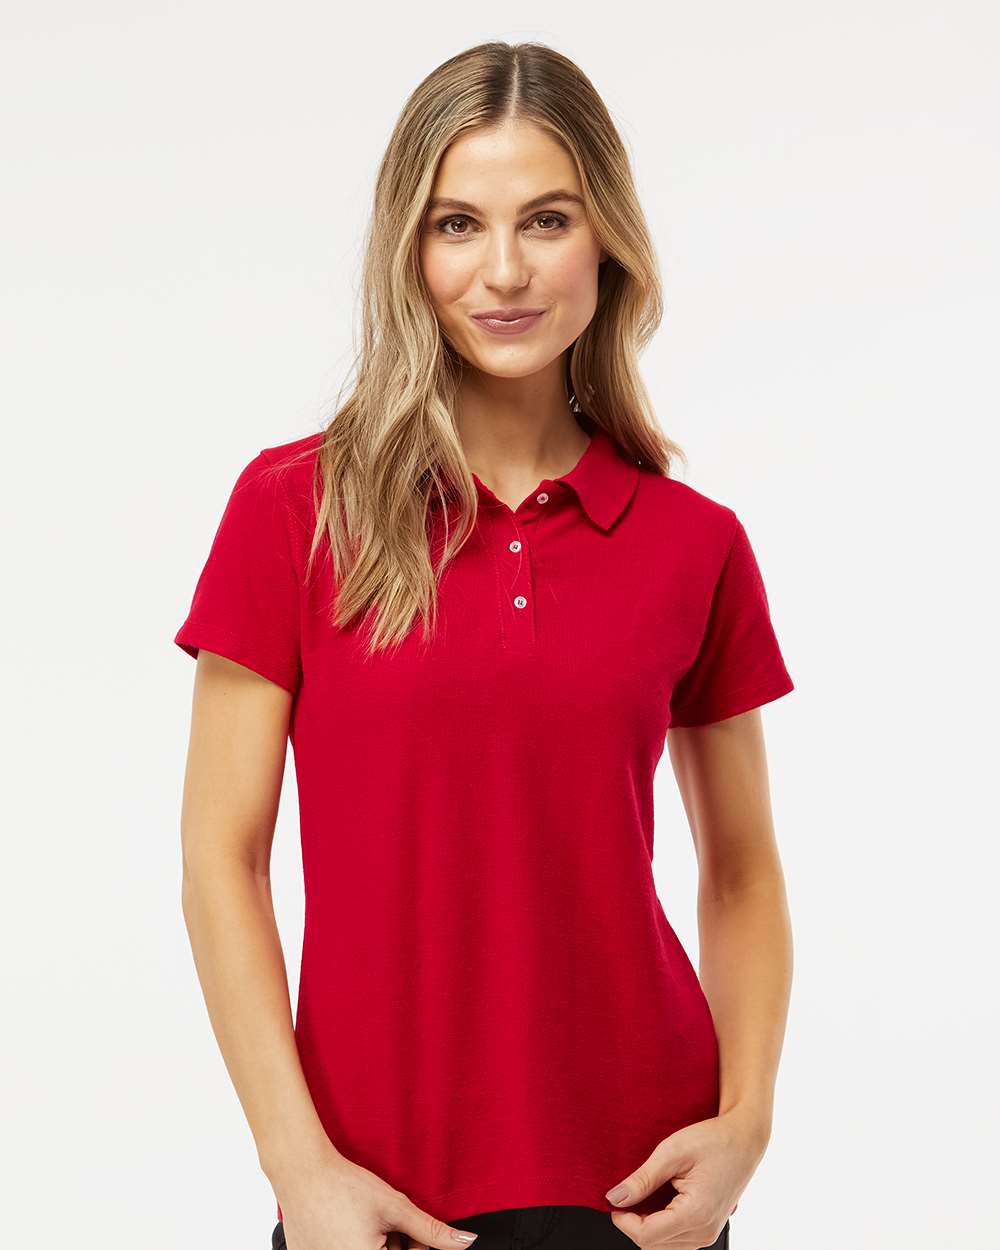 M&O Women’s Soft Touch Polo #7007 Red